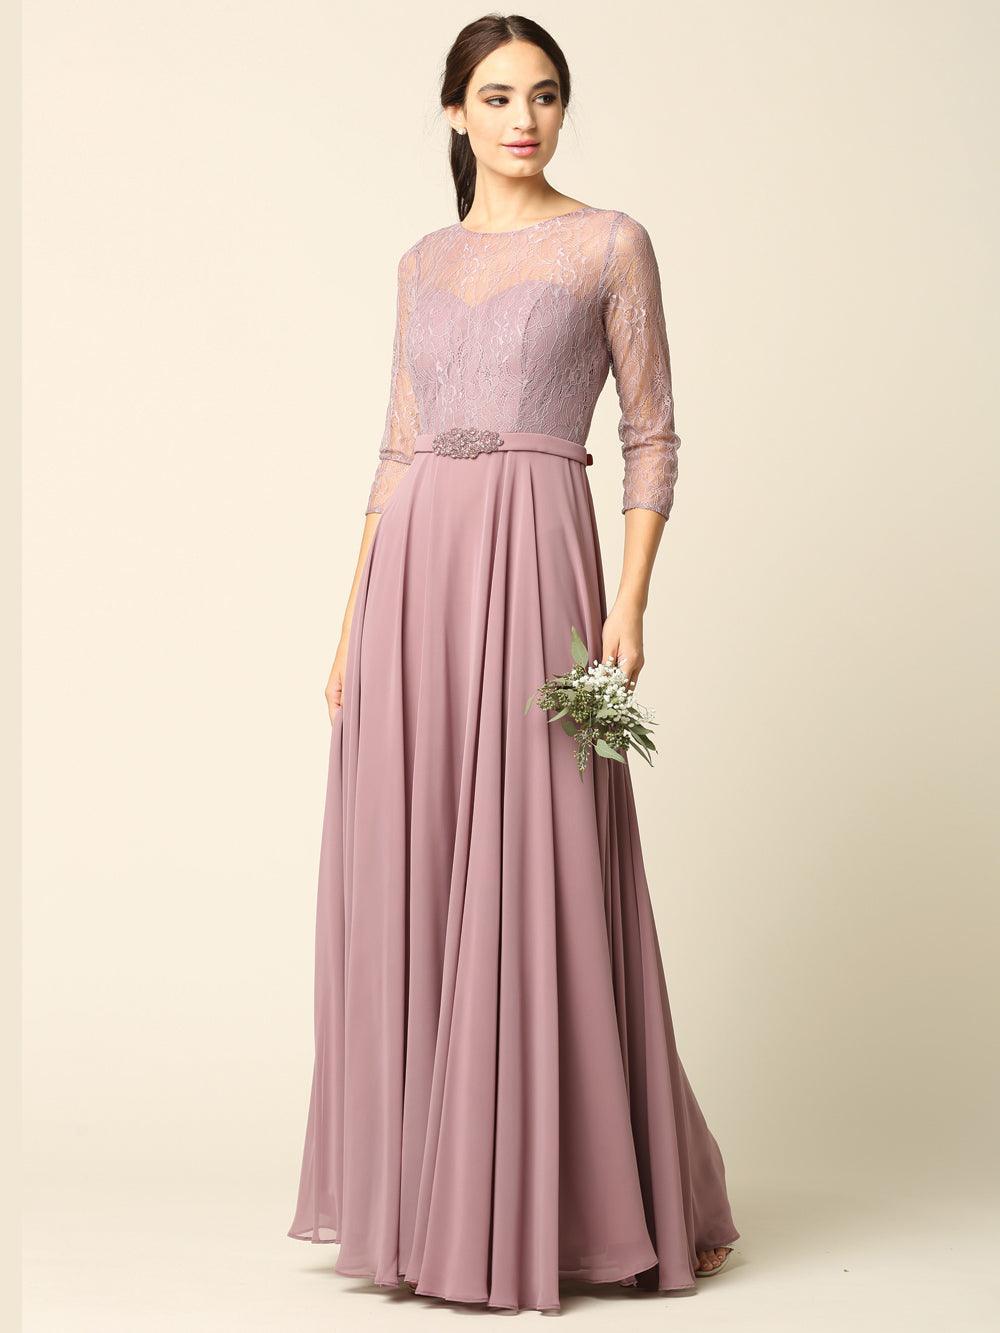 Mother of the Bride Long Formal Lace Chiffon Dress - The Dress Outlet